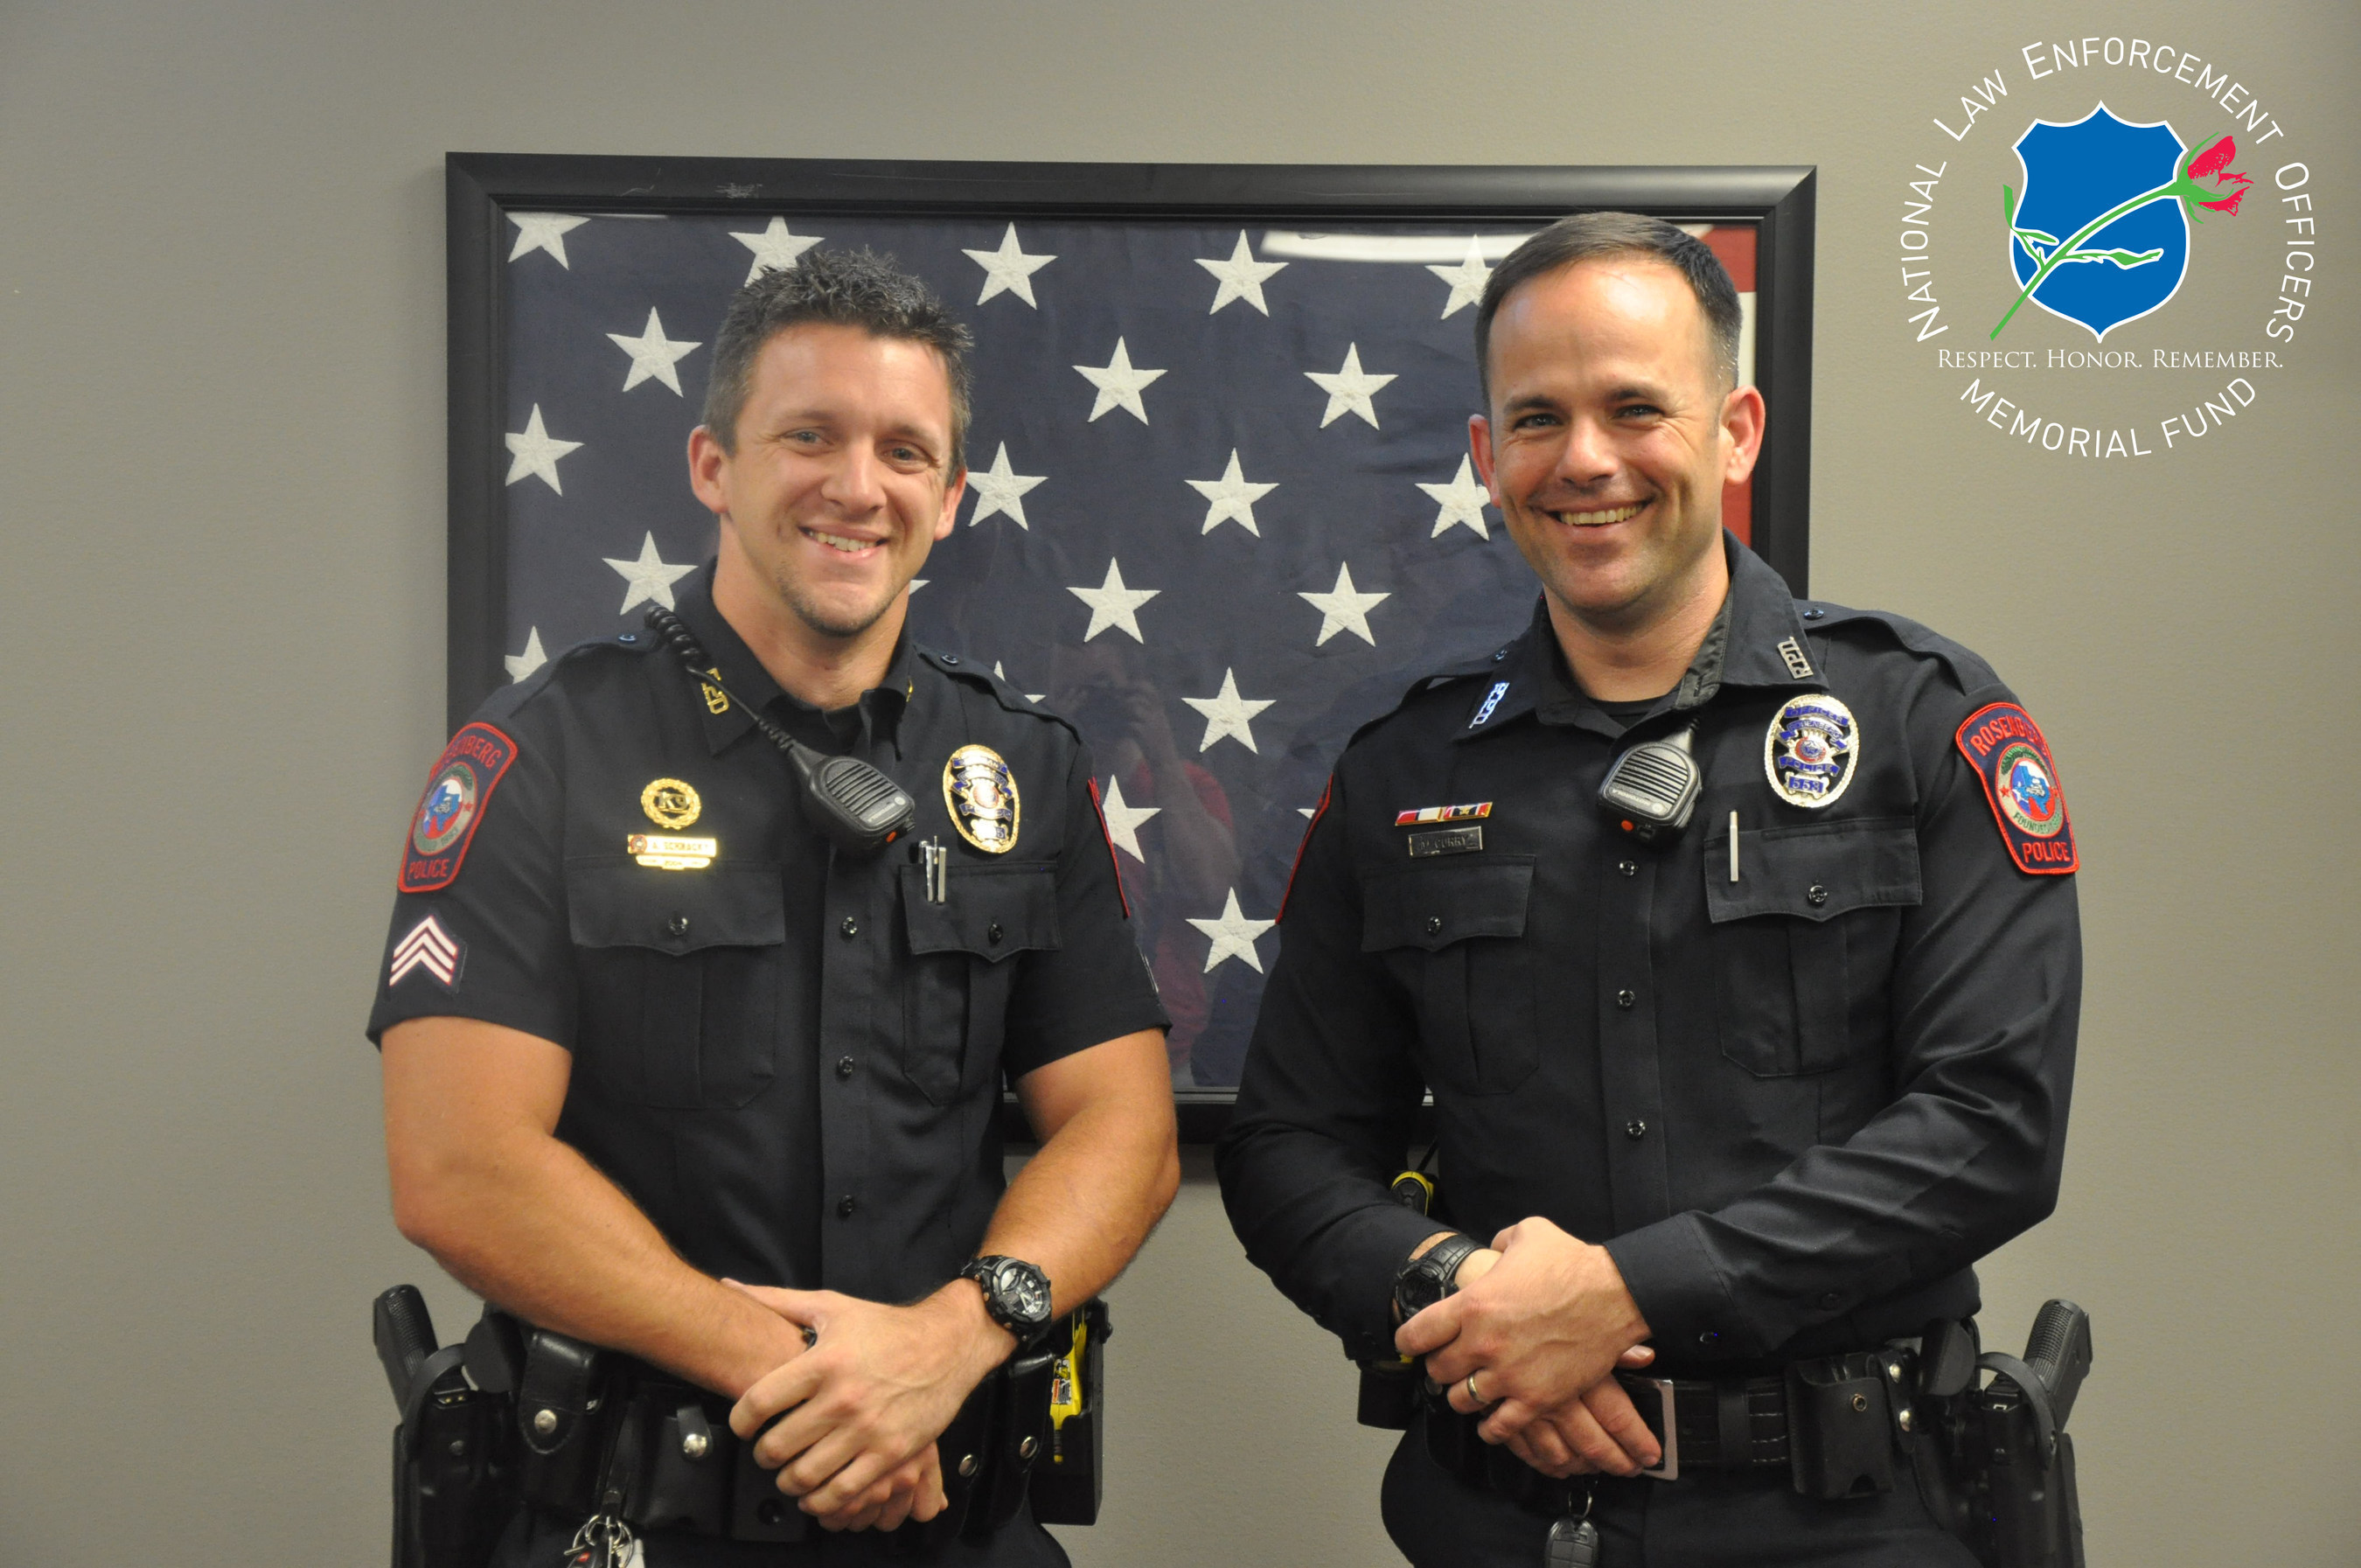 Sergeant Anthony Schnacky and Officer Matthew Curry Receive June 2015 Officer of the Month Award.